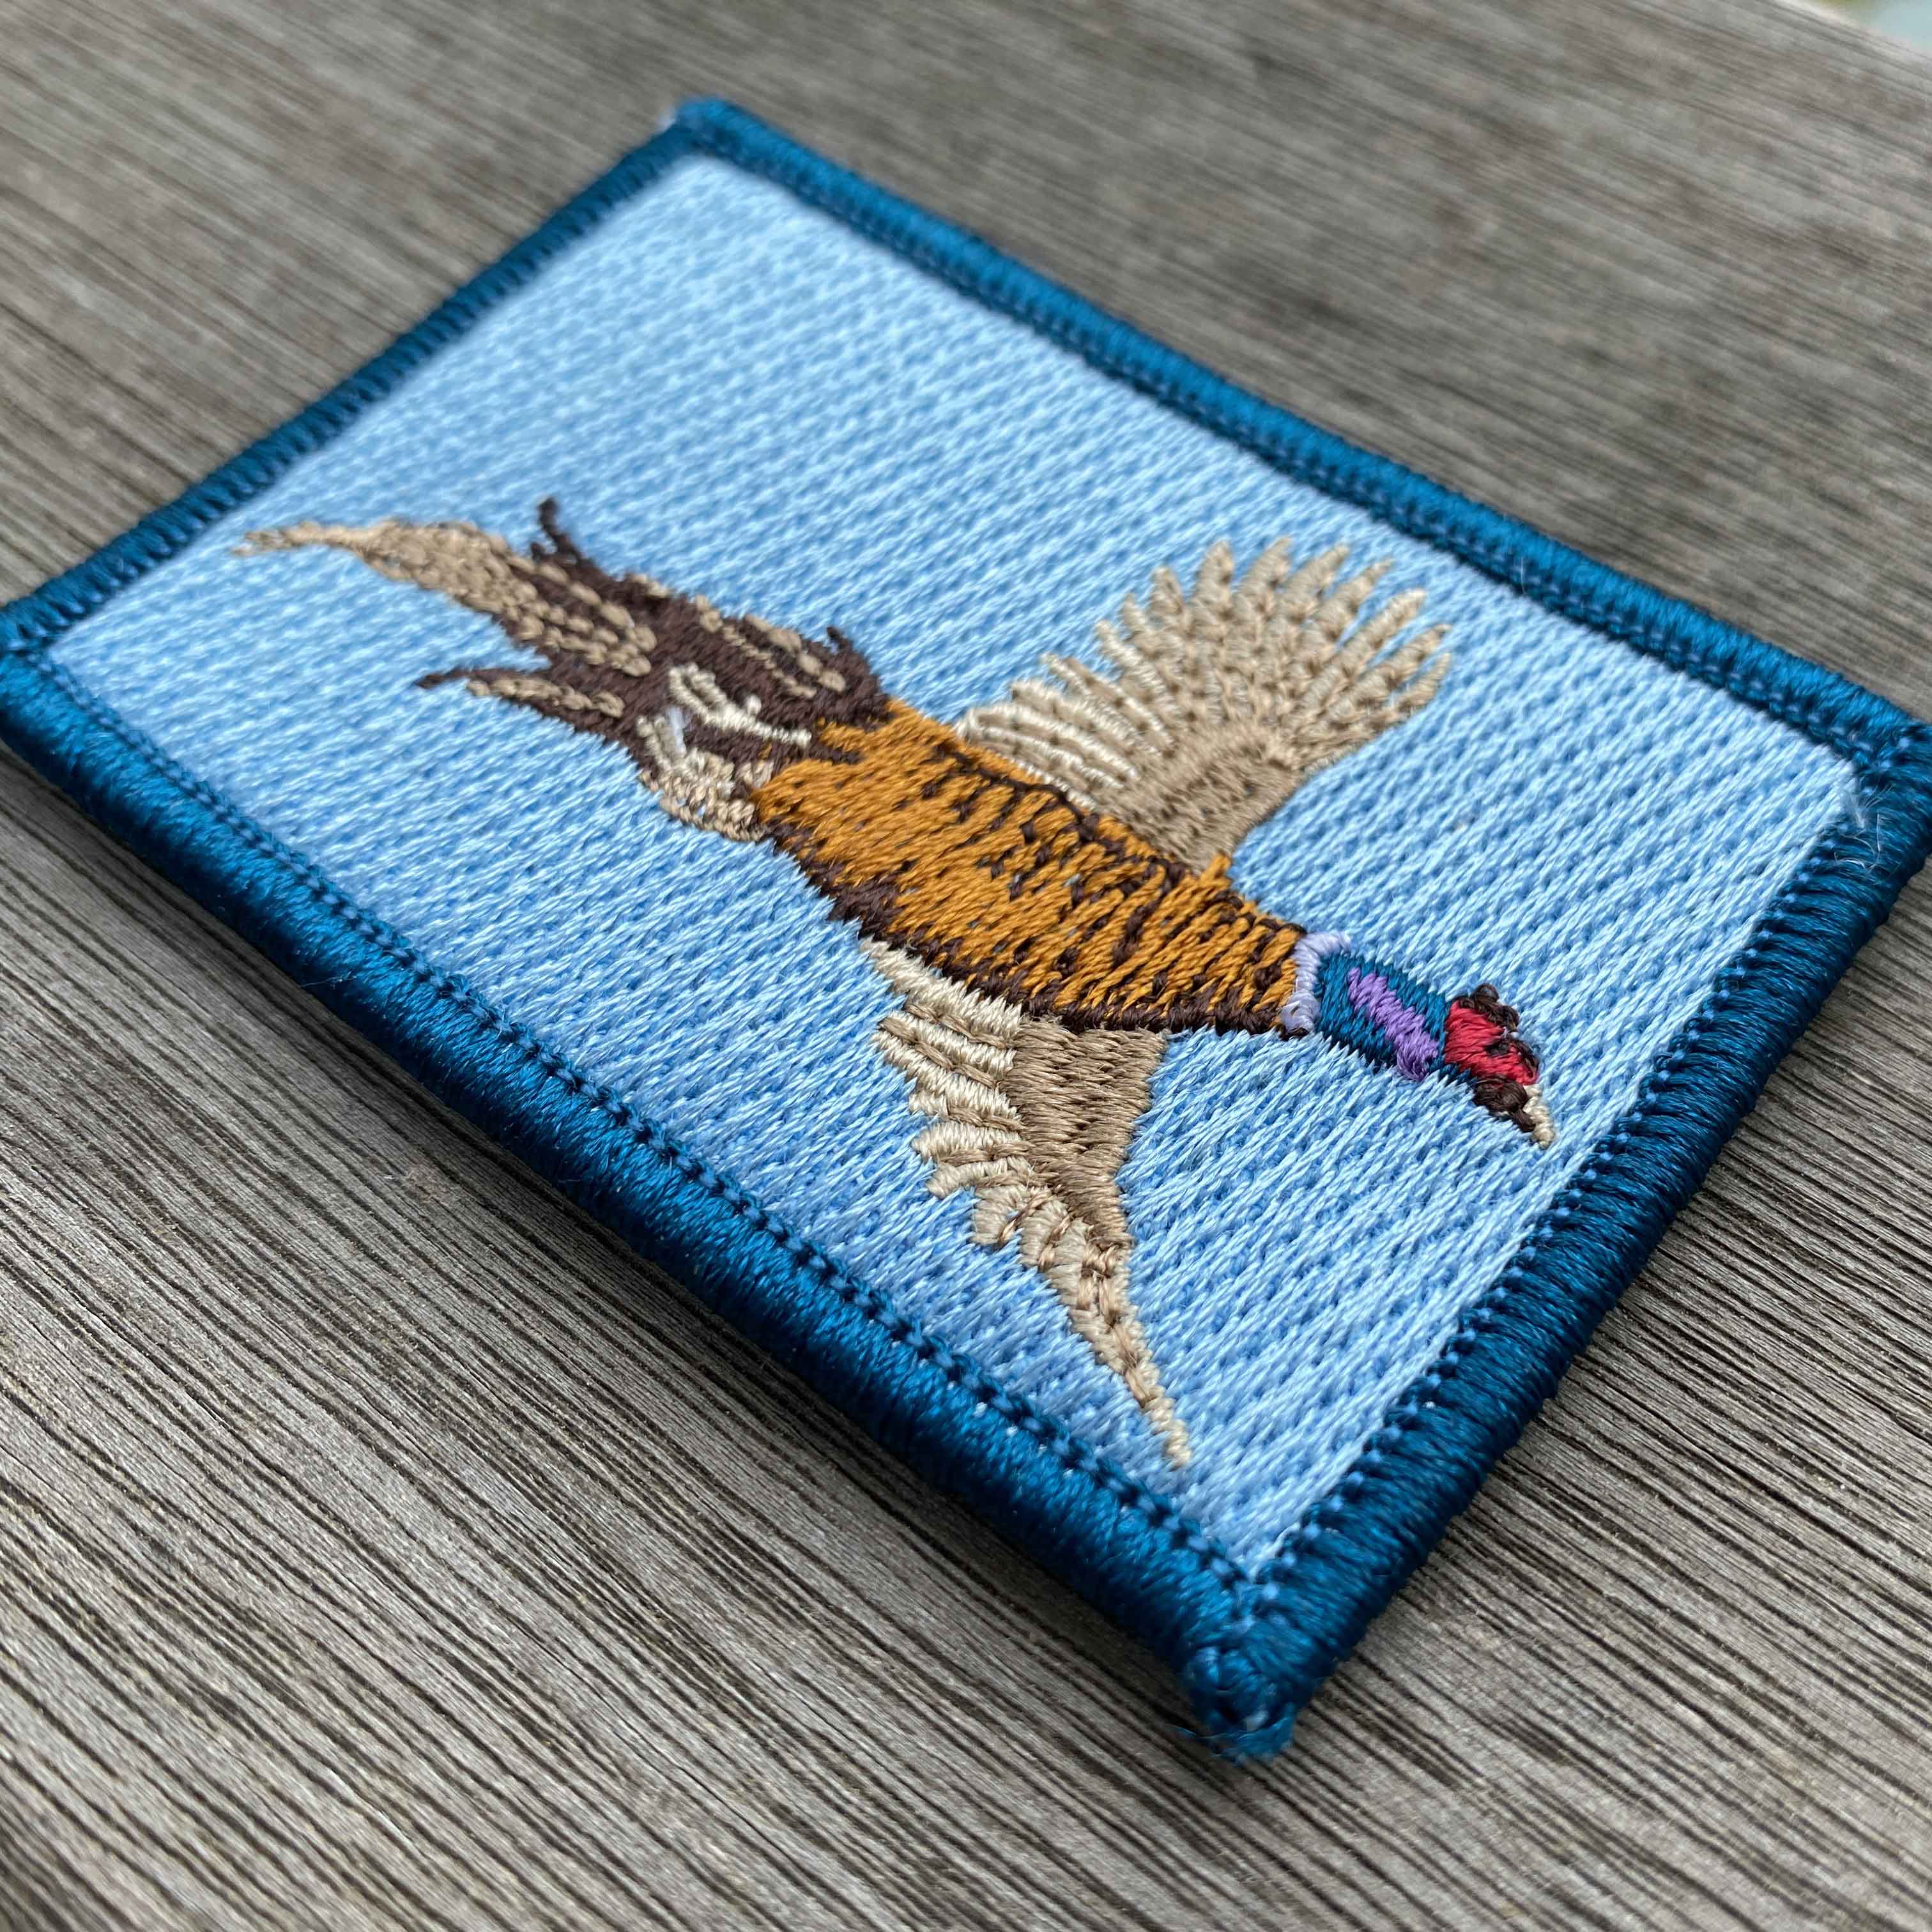 2"x3" Pheasant Tactical Patch